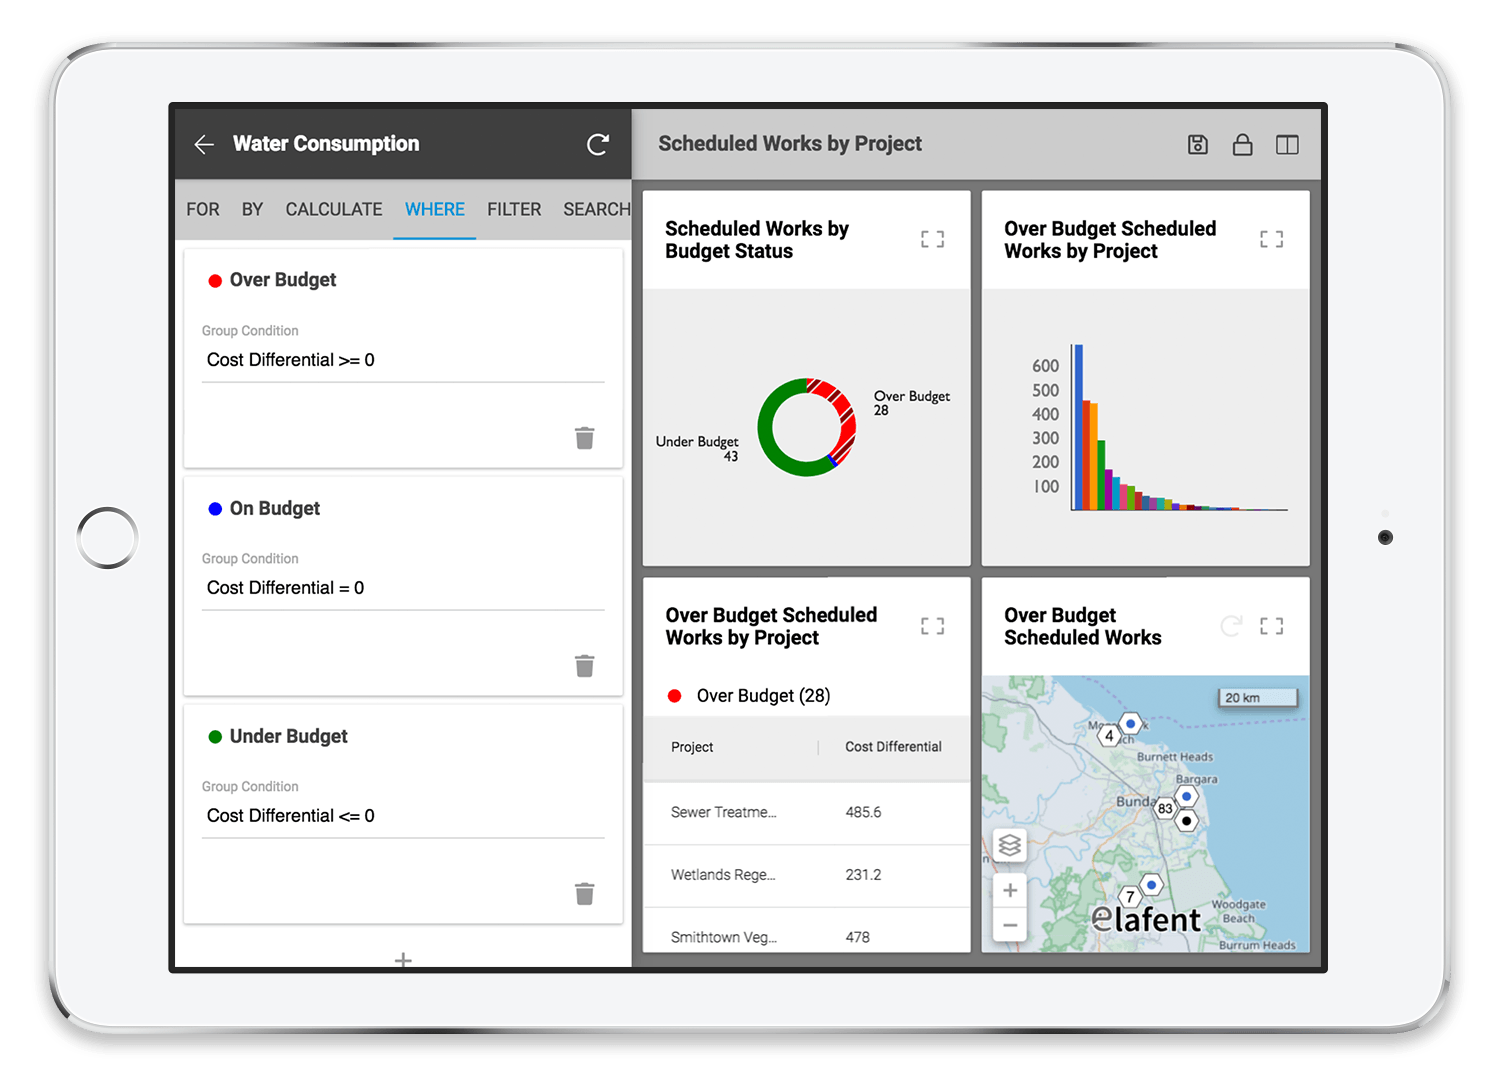  The “ Over Budget ” segment in the pie chart widget can be selected to update the linked table and spatial widgets, so only information applicable to over budget scheduled works projects is displayed 